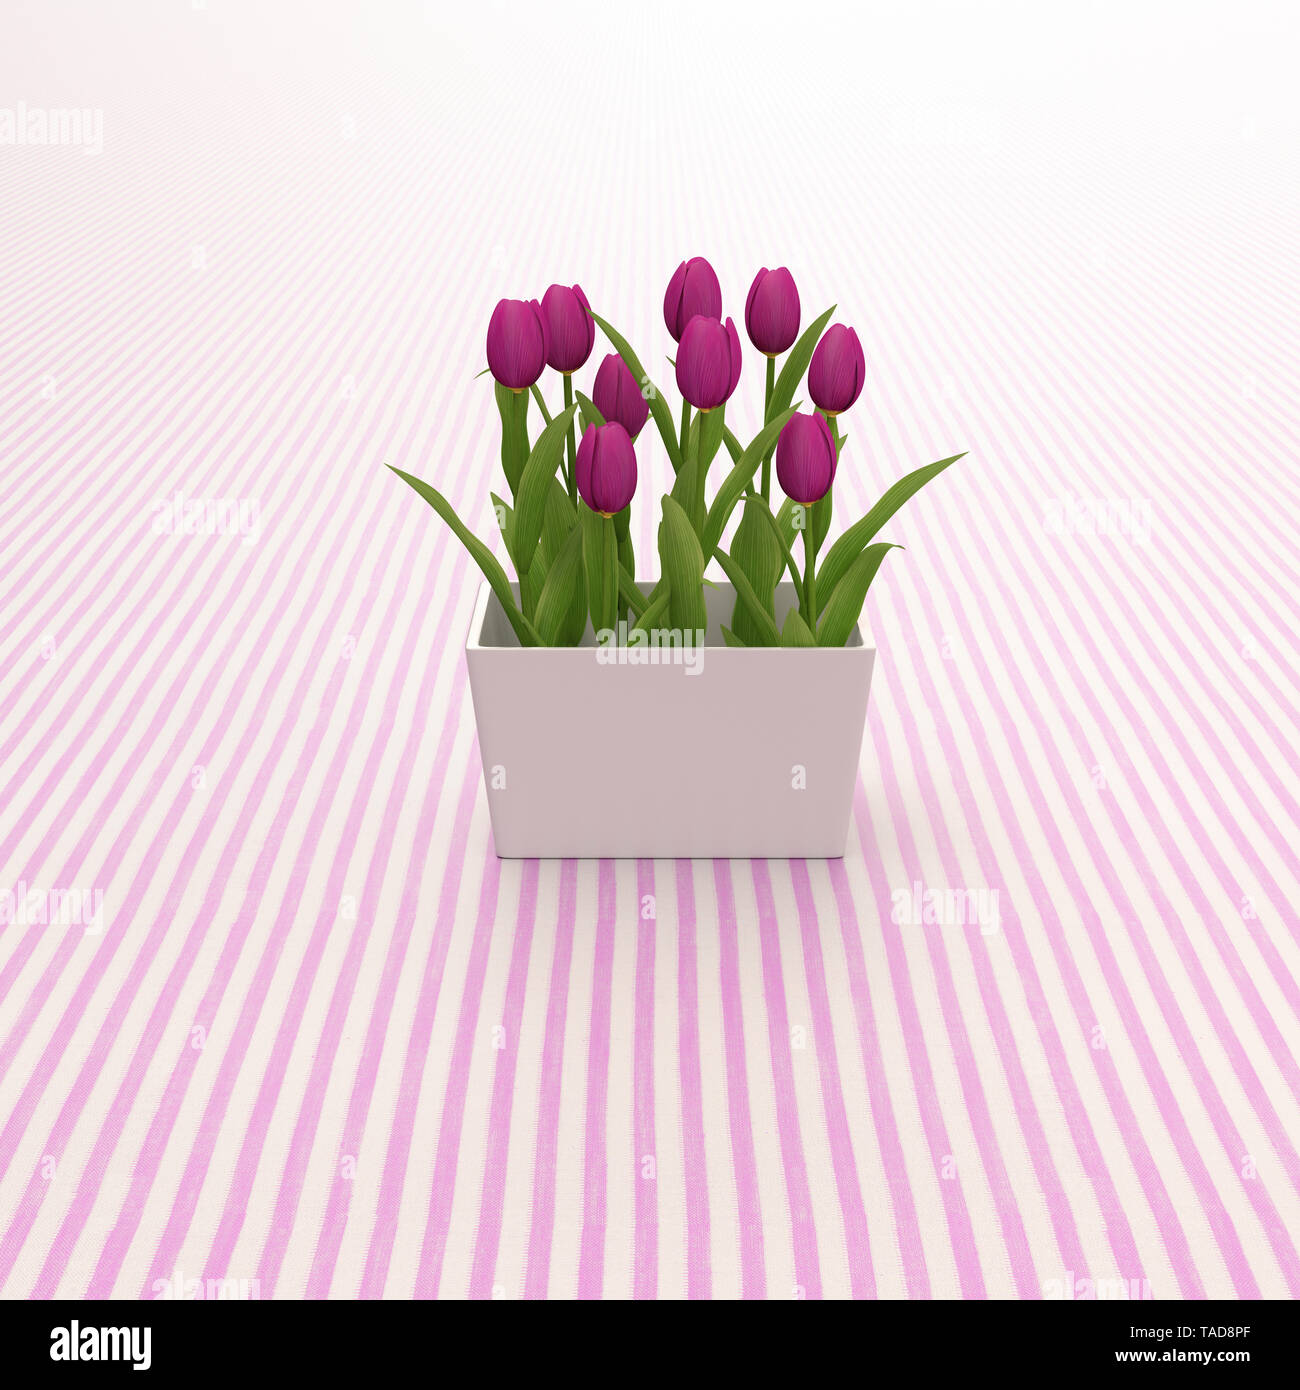 3D rendering, Pink tulips on striped background Stock Photo